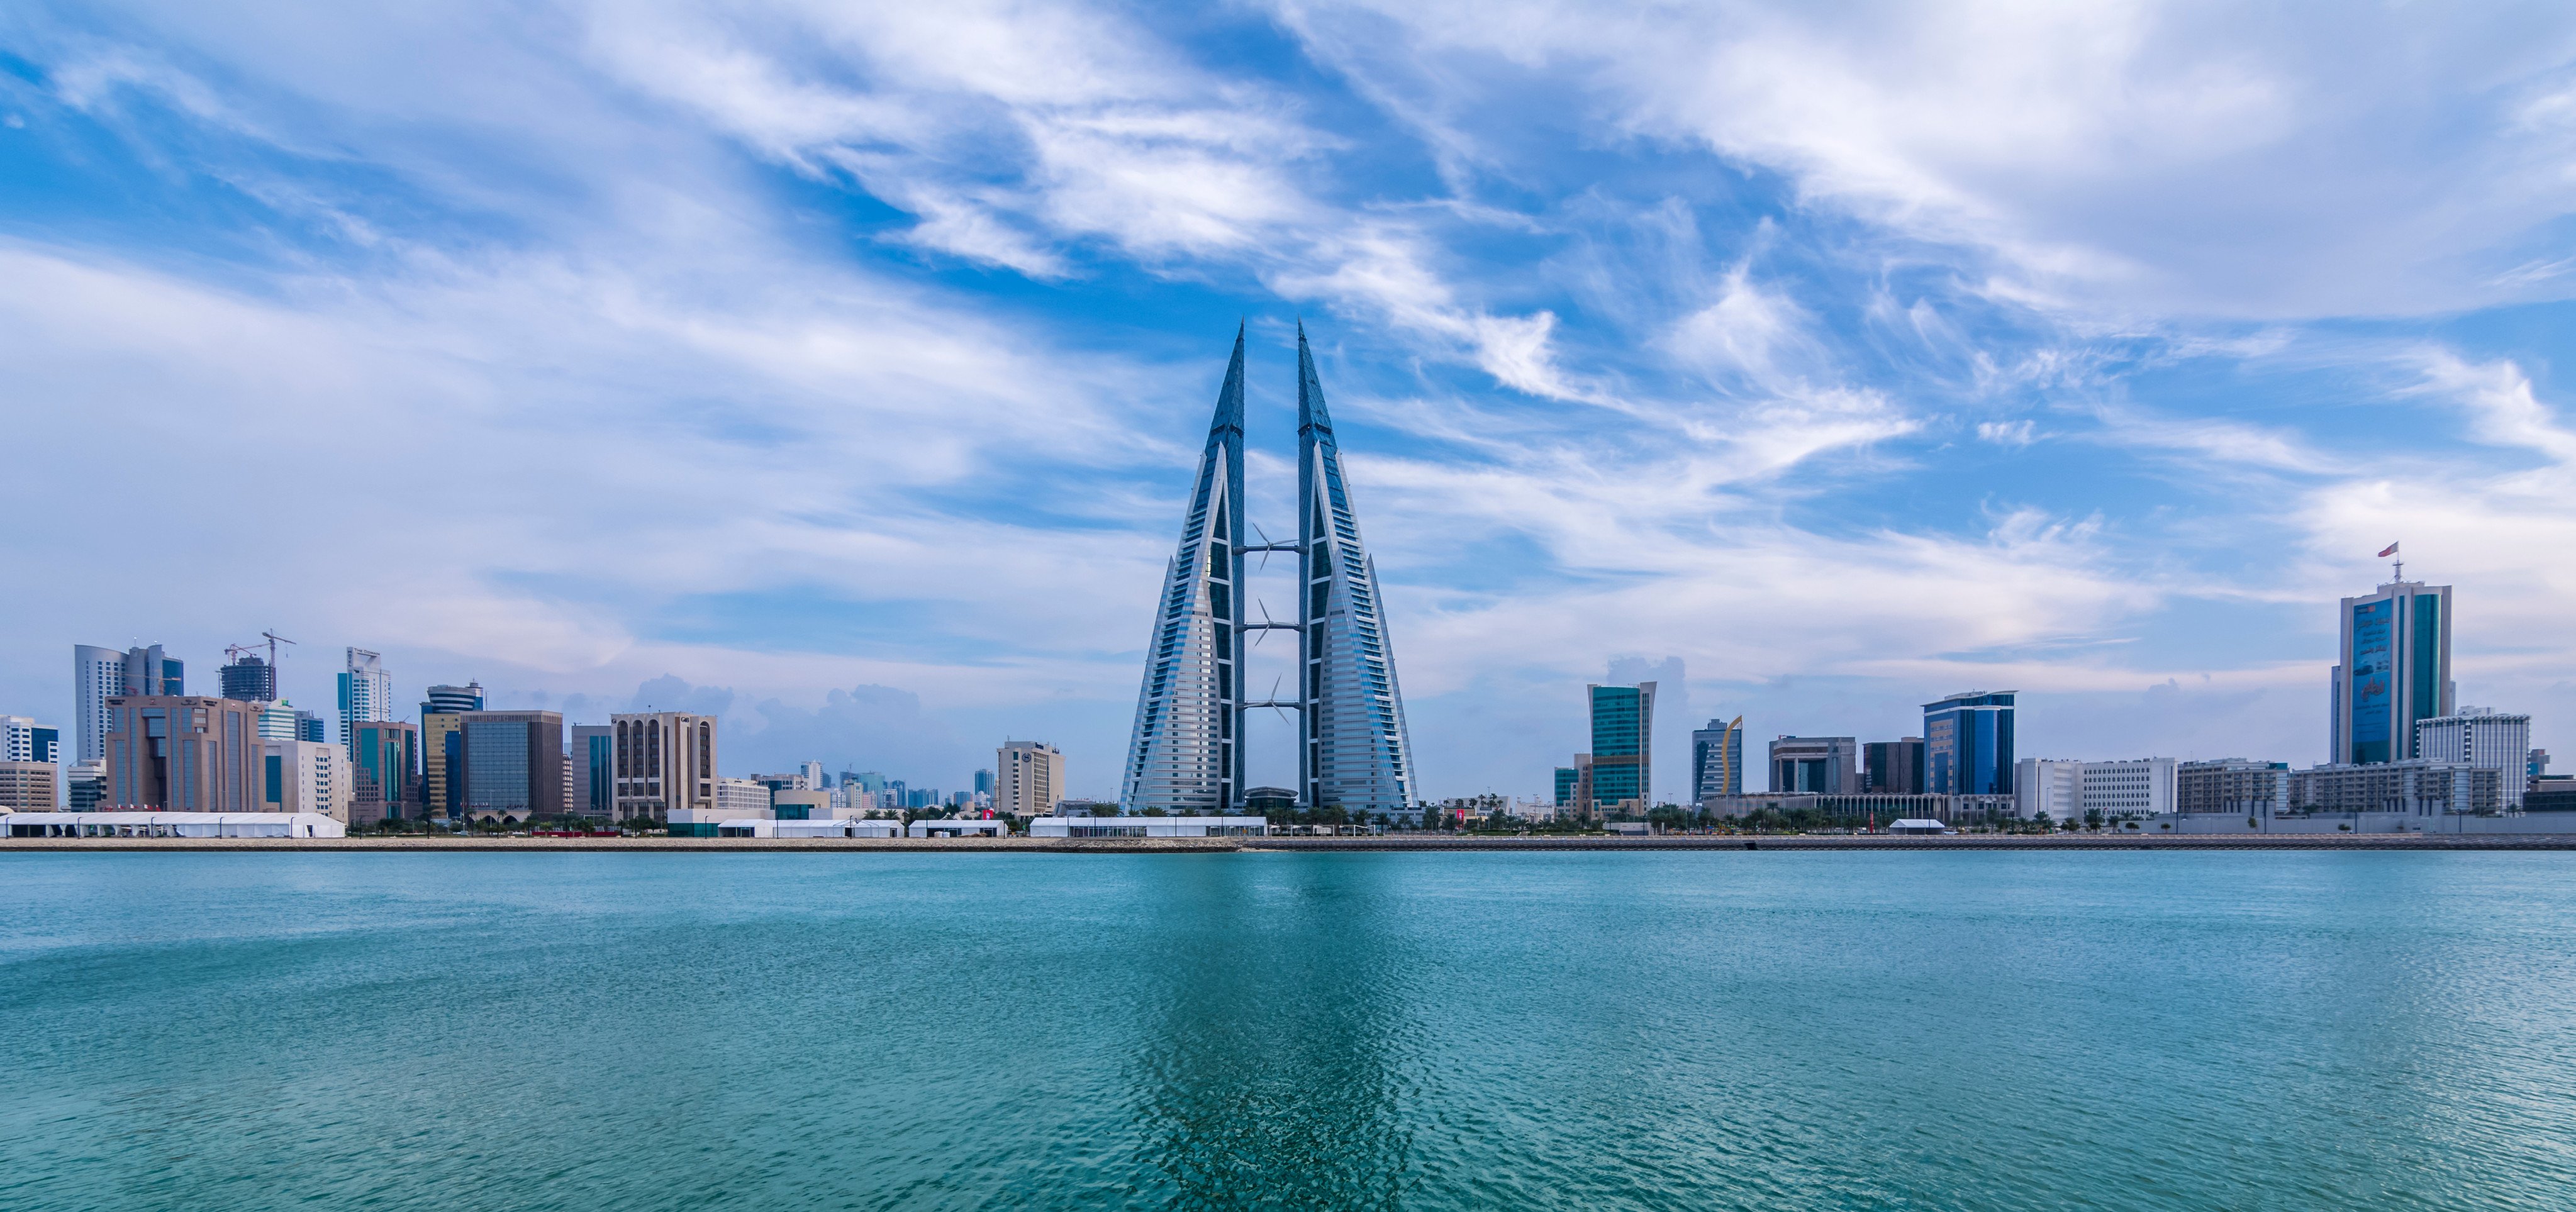 A view of the World Trade Center and other buildings in Manama, Bahrain, where Investcorp Holdings is based. Photo: Shutterstock